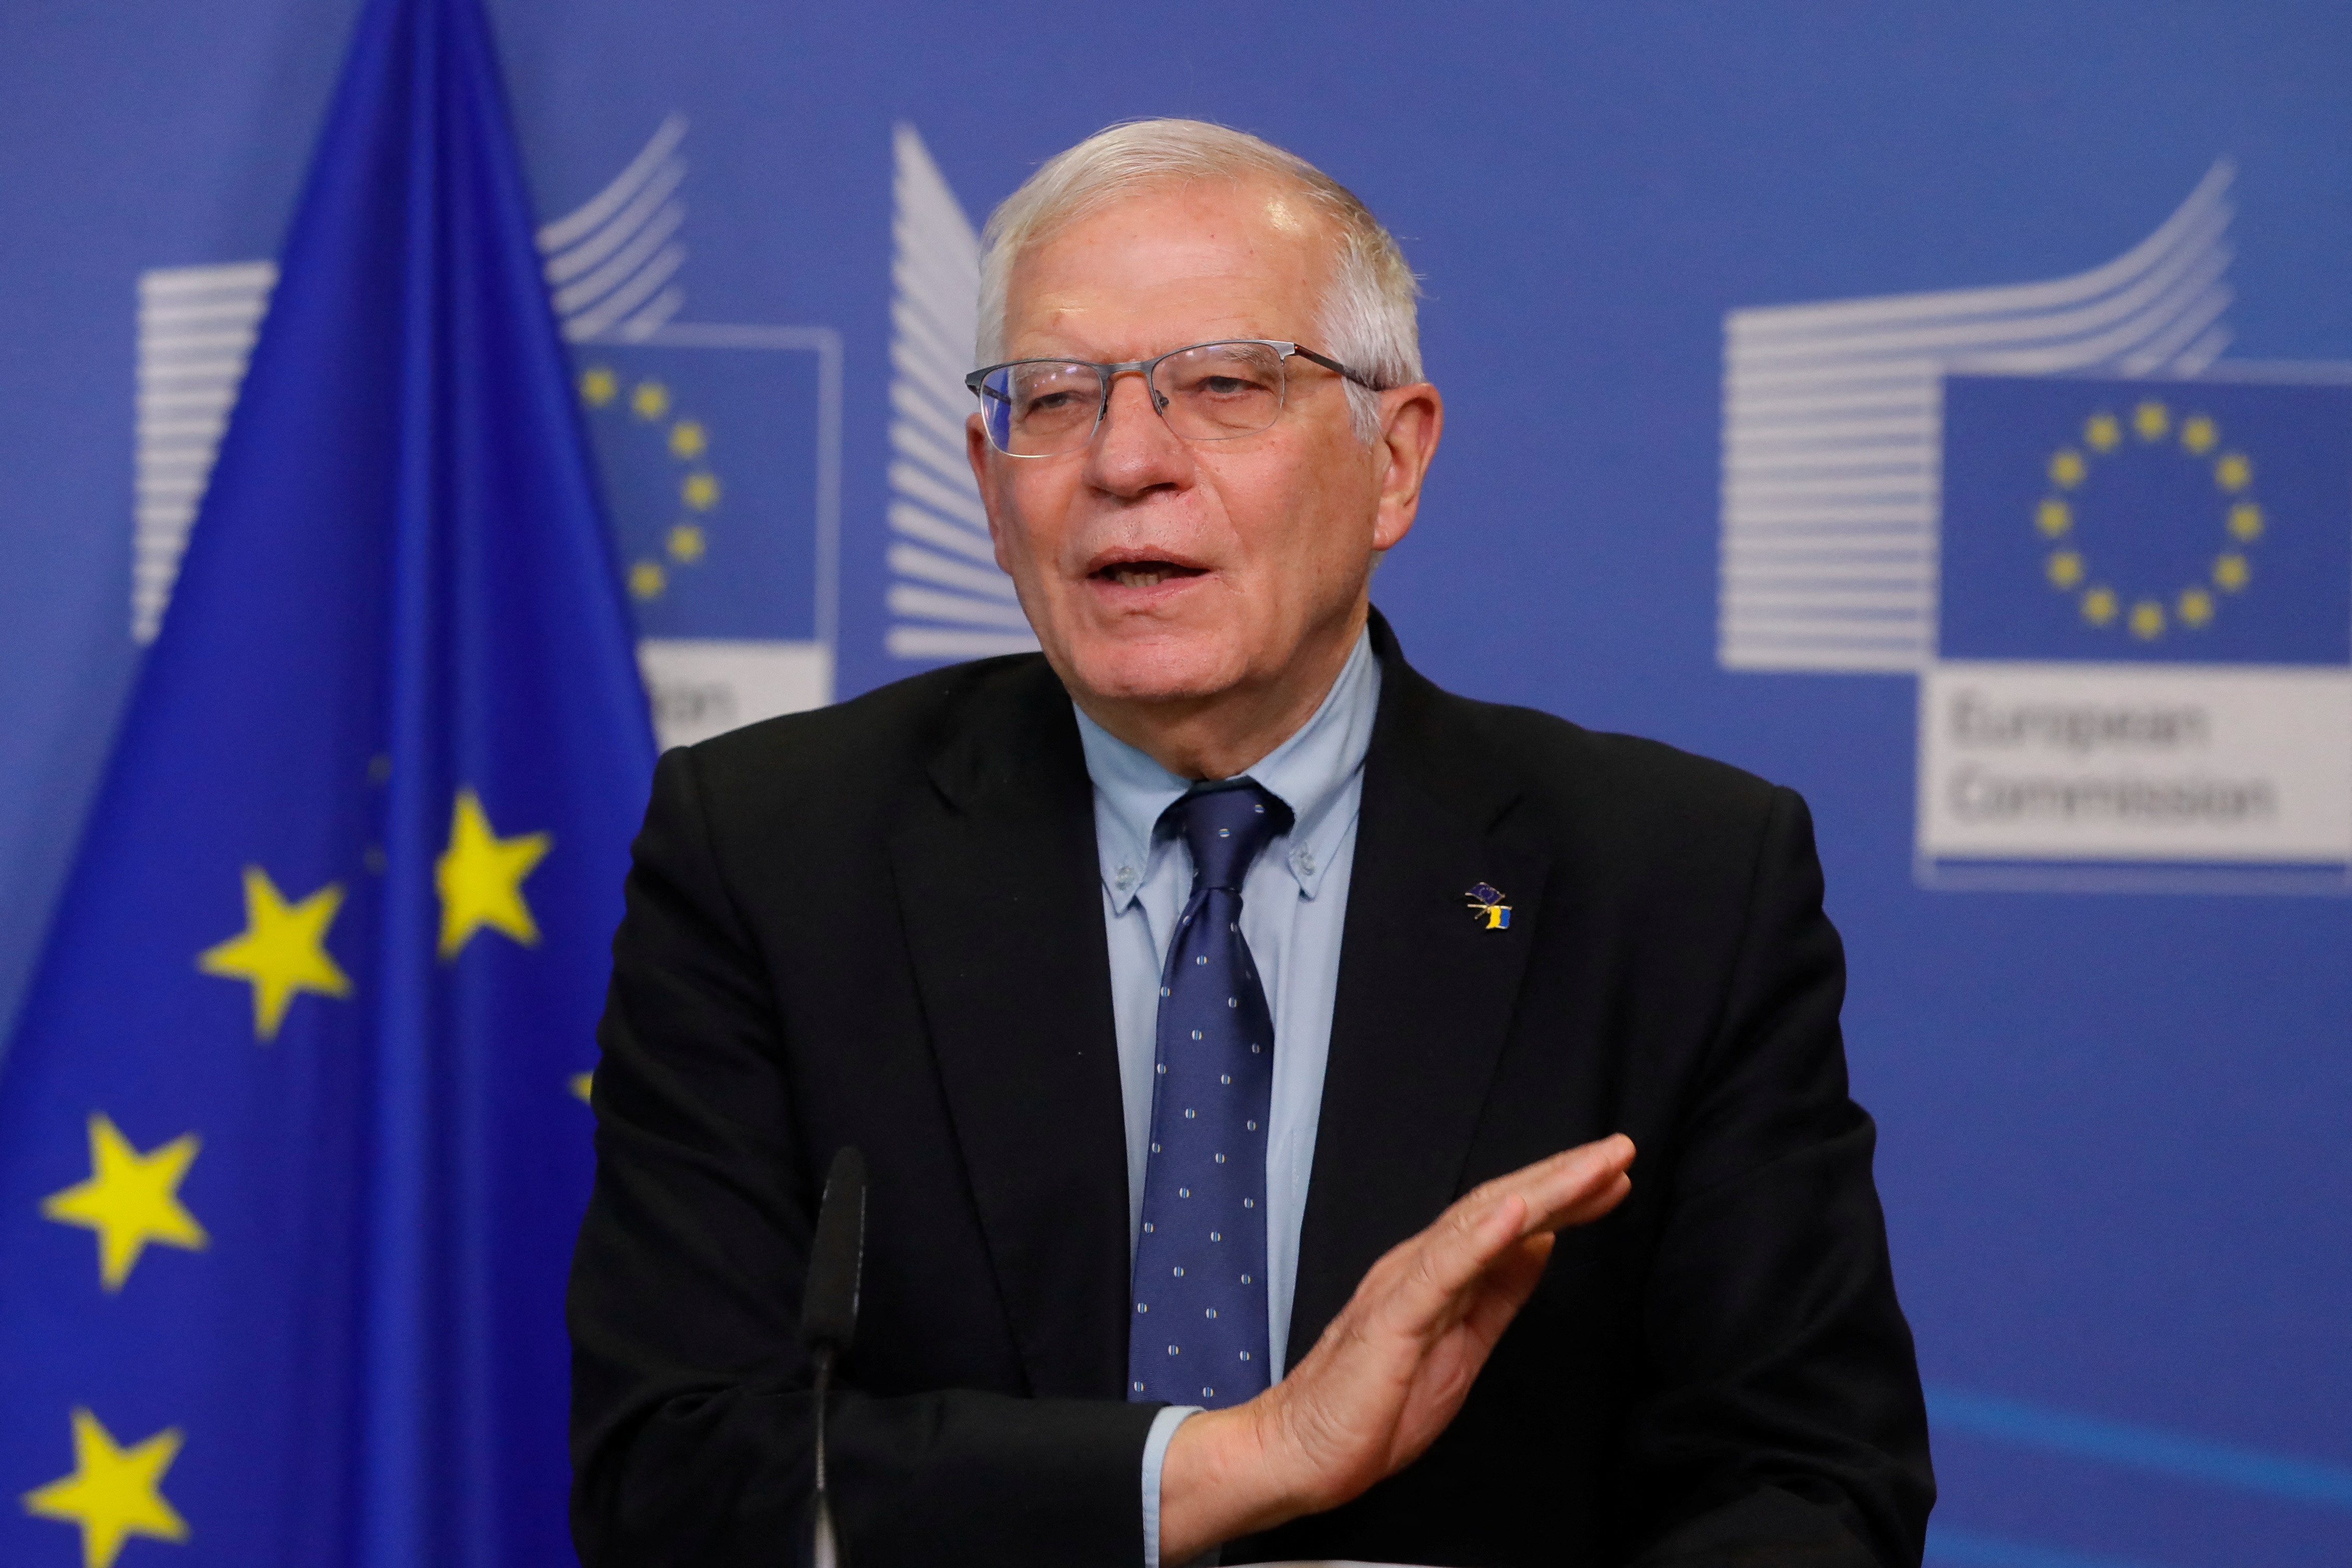 High Representative of the European Union for Foreign Affairs and Security Policy Josep Borrell and European Commission President Ursula von der Leyen address the media, in Brussels